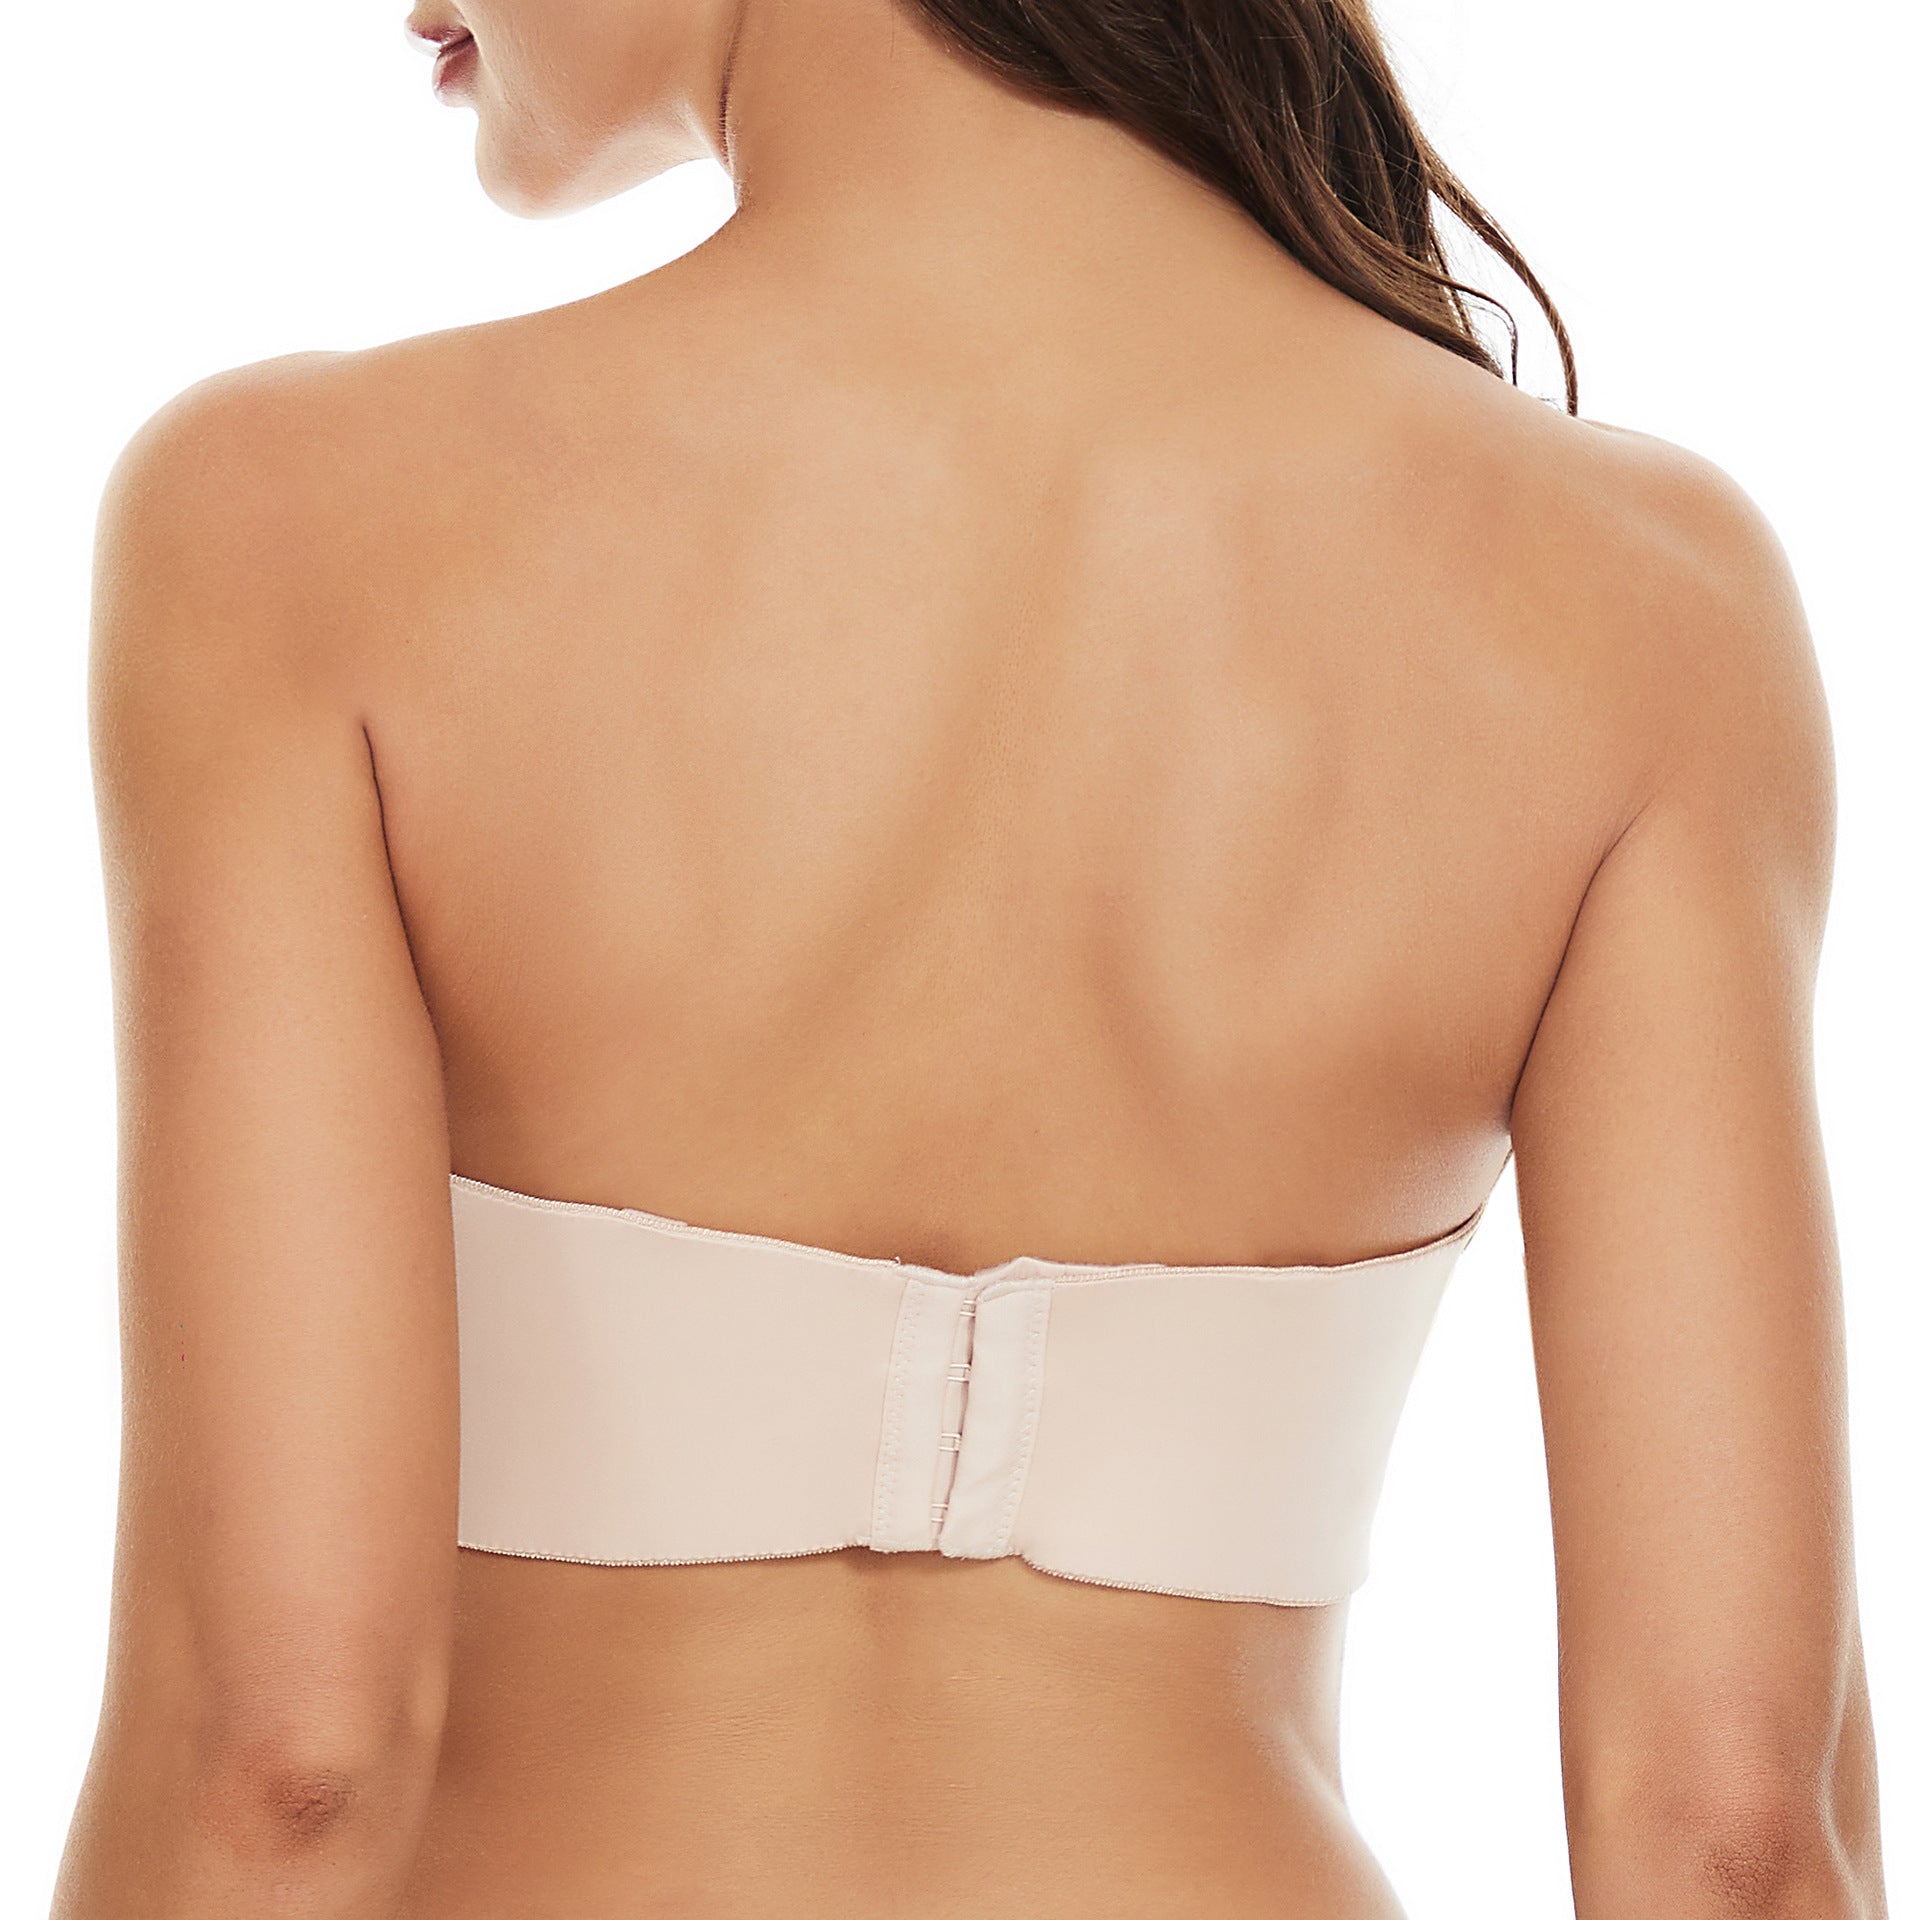 This Strapless Bra Hack Gives You the Most Support